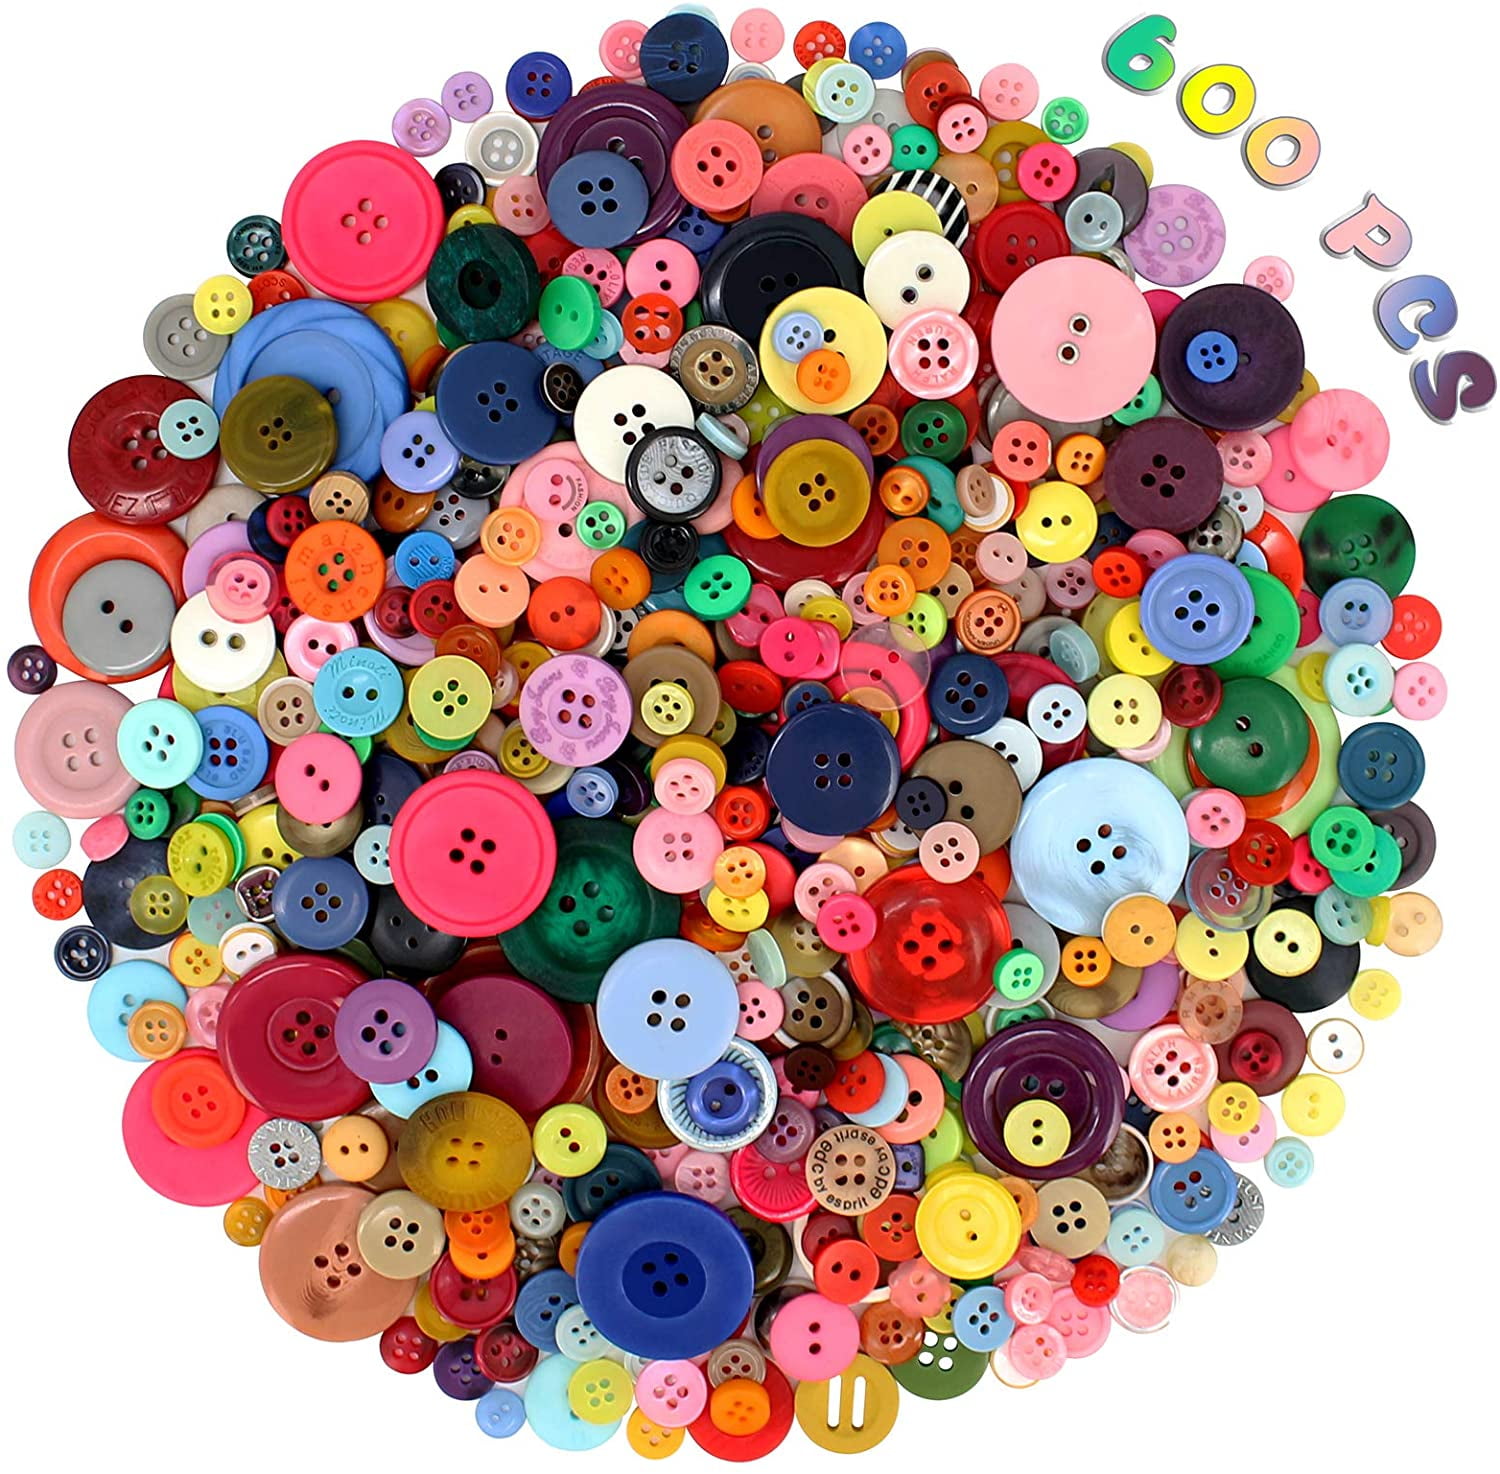 Kovolala 600-800 PCS Various Size Buttons for Crafts Various Shapes Color  Sewing Craft Kids Handmade Button Painting DIY Ornament with 60 Long Soft